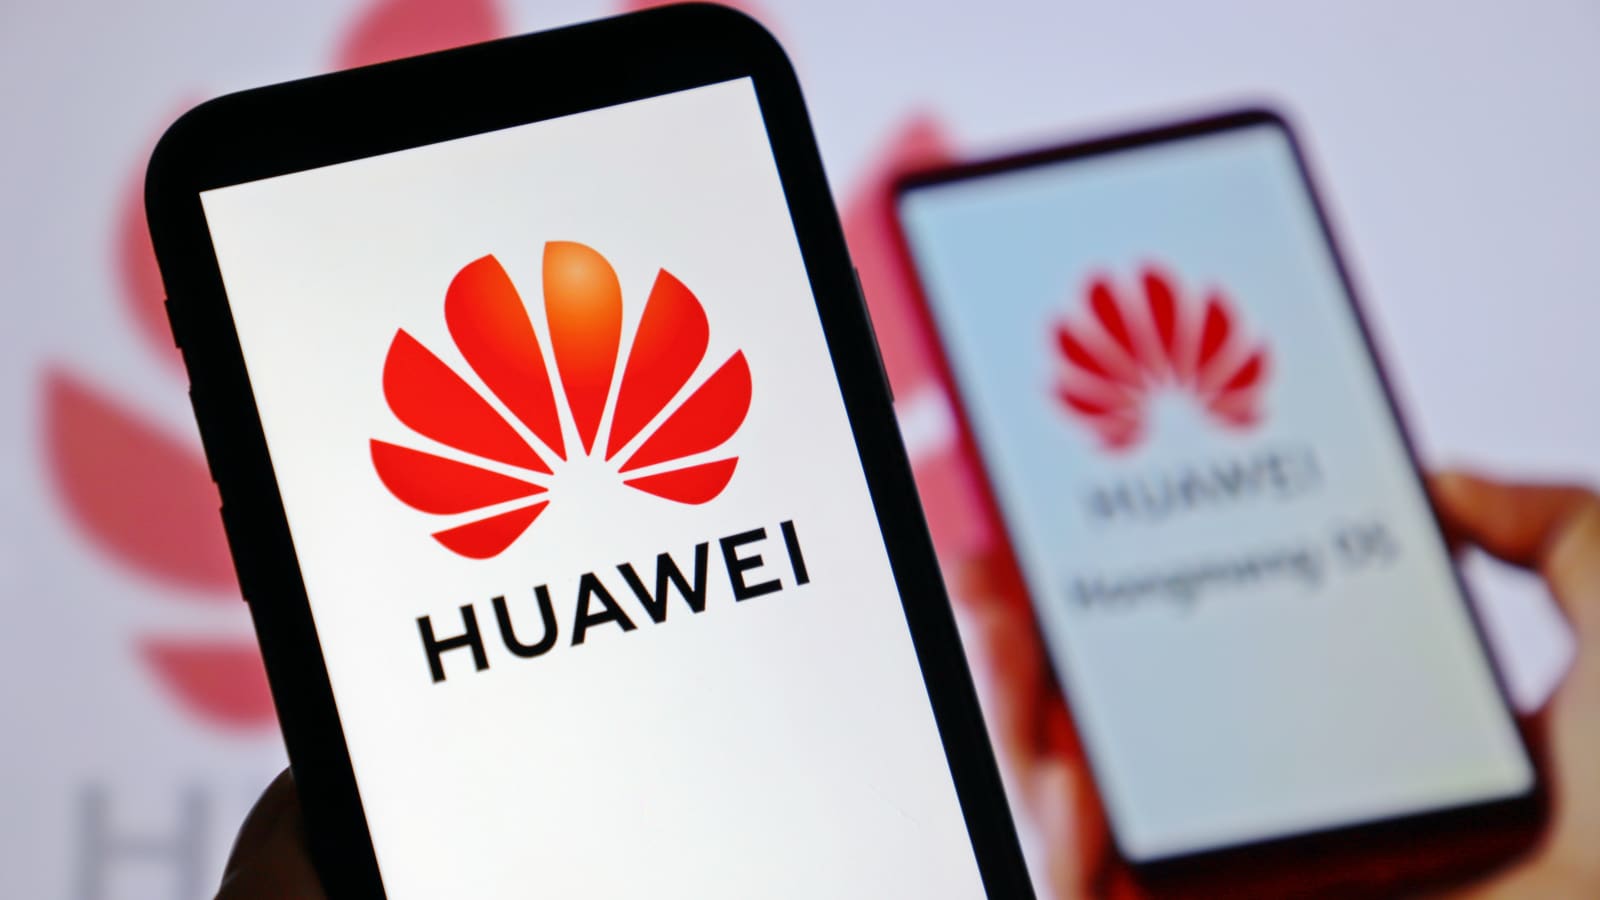 Huawei Cupon Descuento